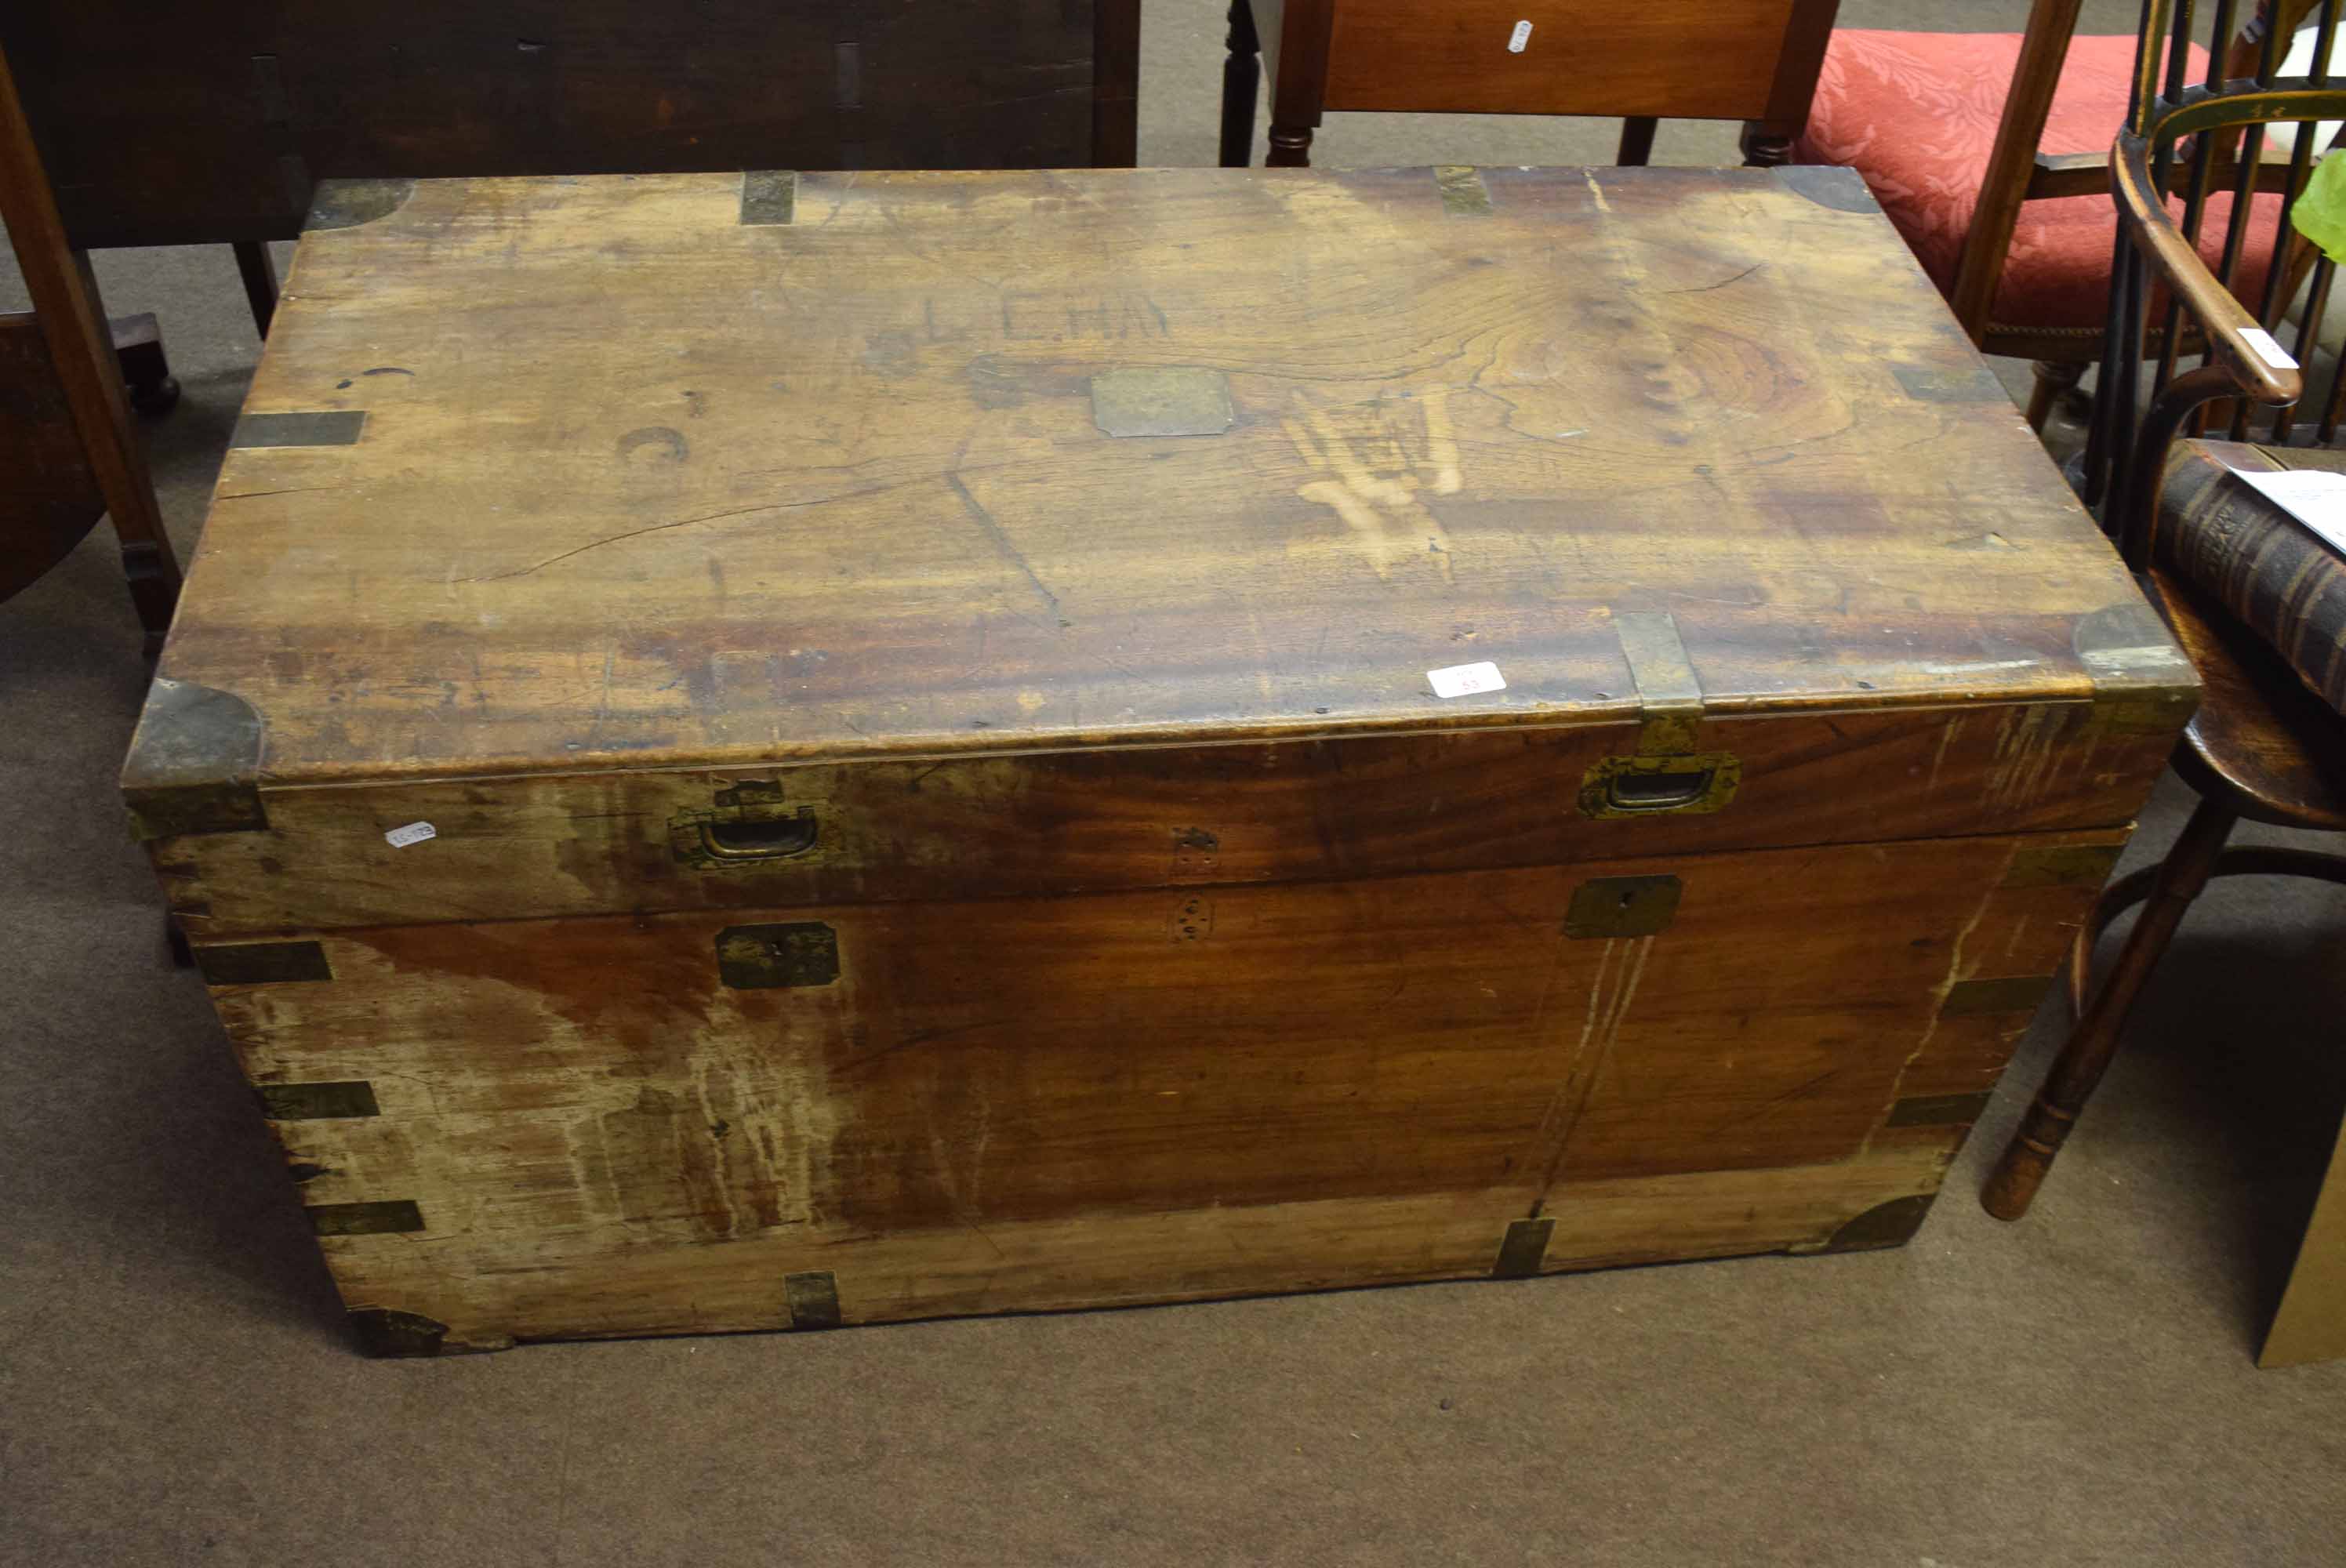 Victorian camphor wood large campaign/storage box, brass bound throughout with further brass